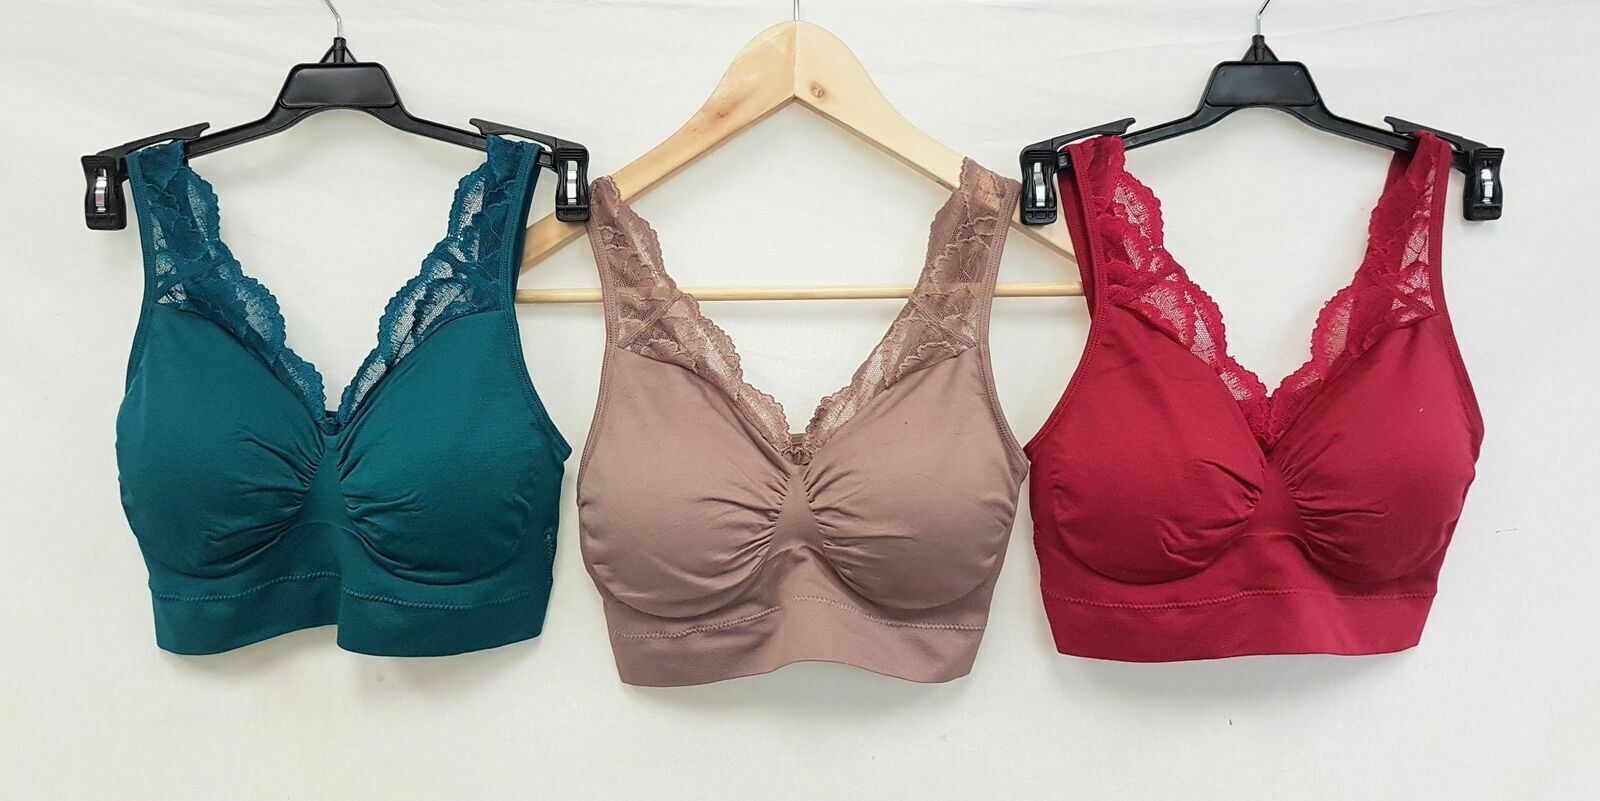 LOT OF 3 Rhonda Shear #9341 Ahh Bra with Lace & Removable Pads, WINE/TEAL/MOCHA